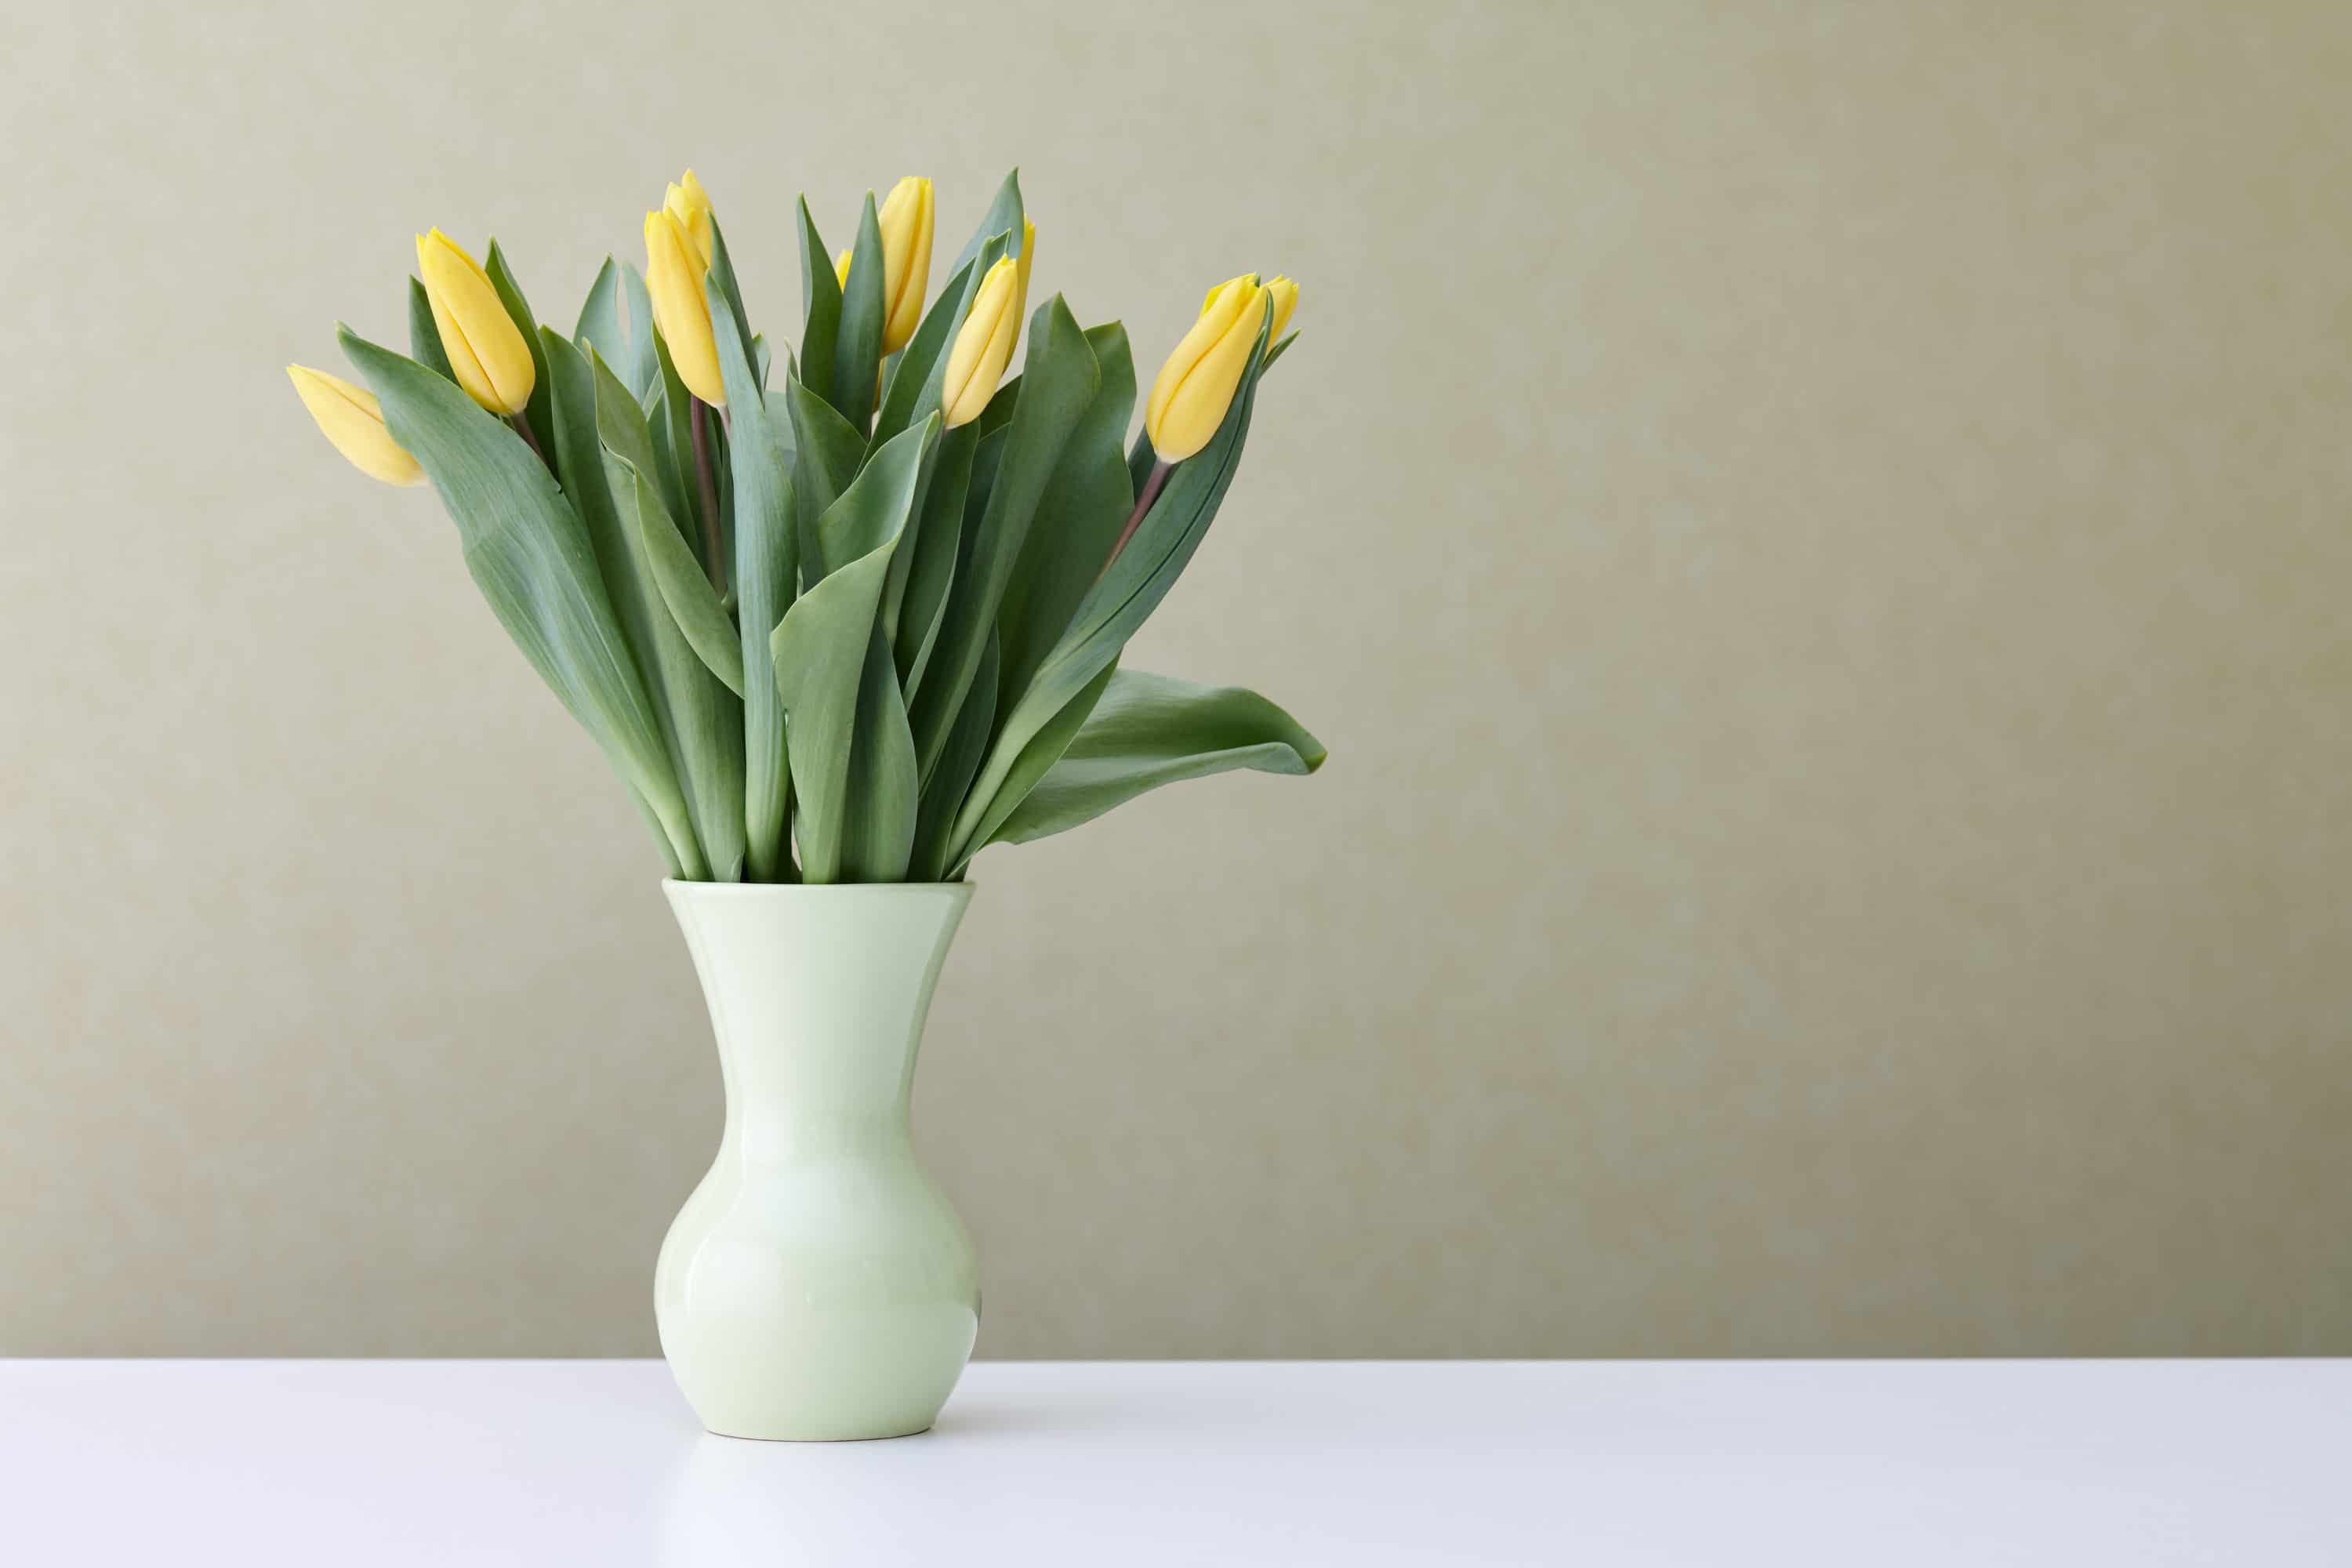 tulips in a green vase for interior home design for easter